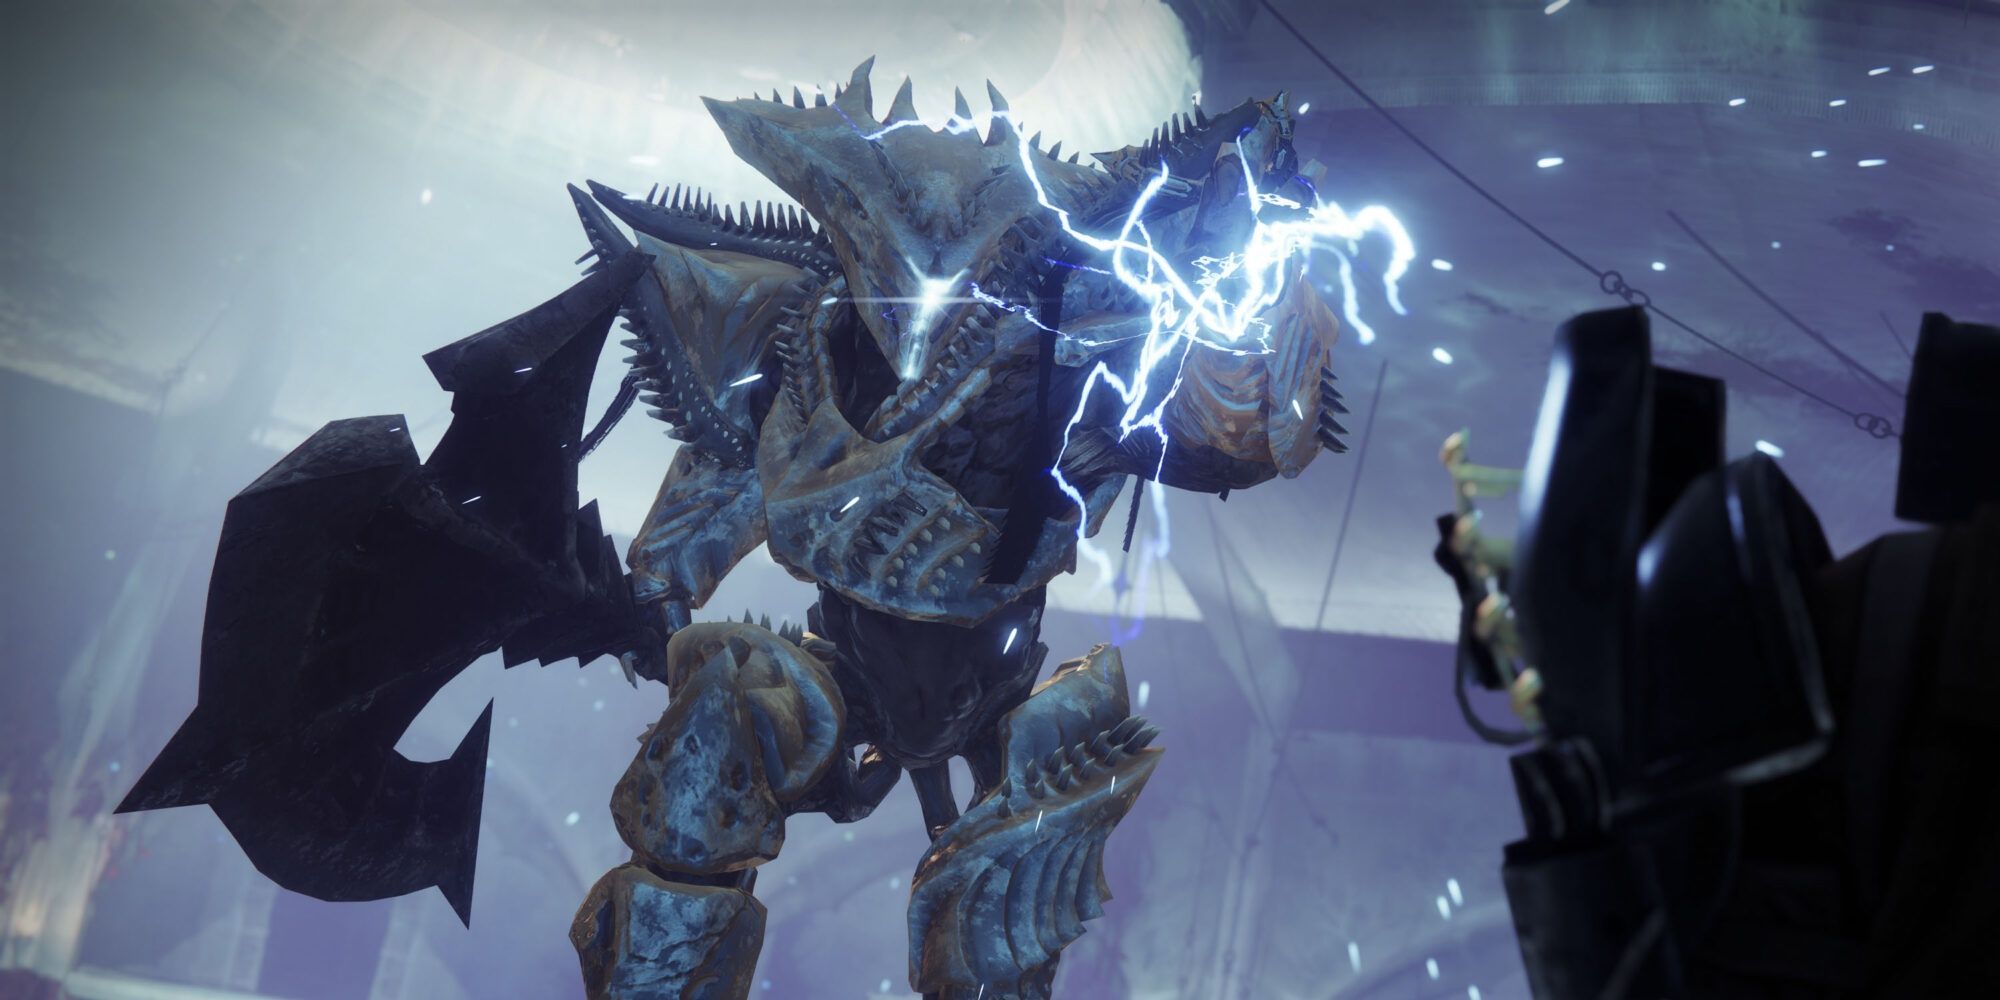 Alak-Hul The Lightblade returns in Destiny 2 as a Hive Guardian